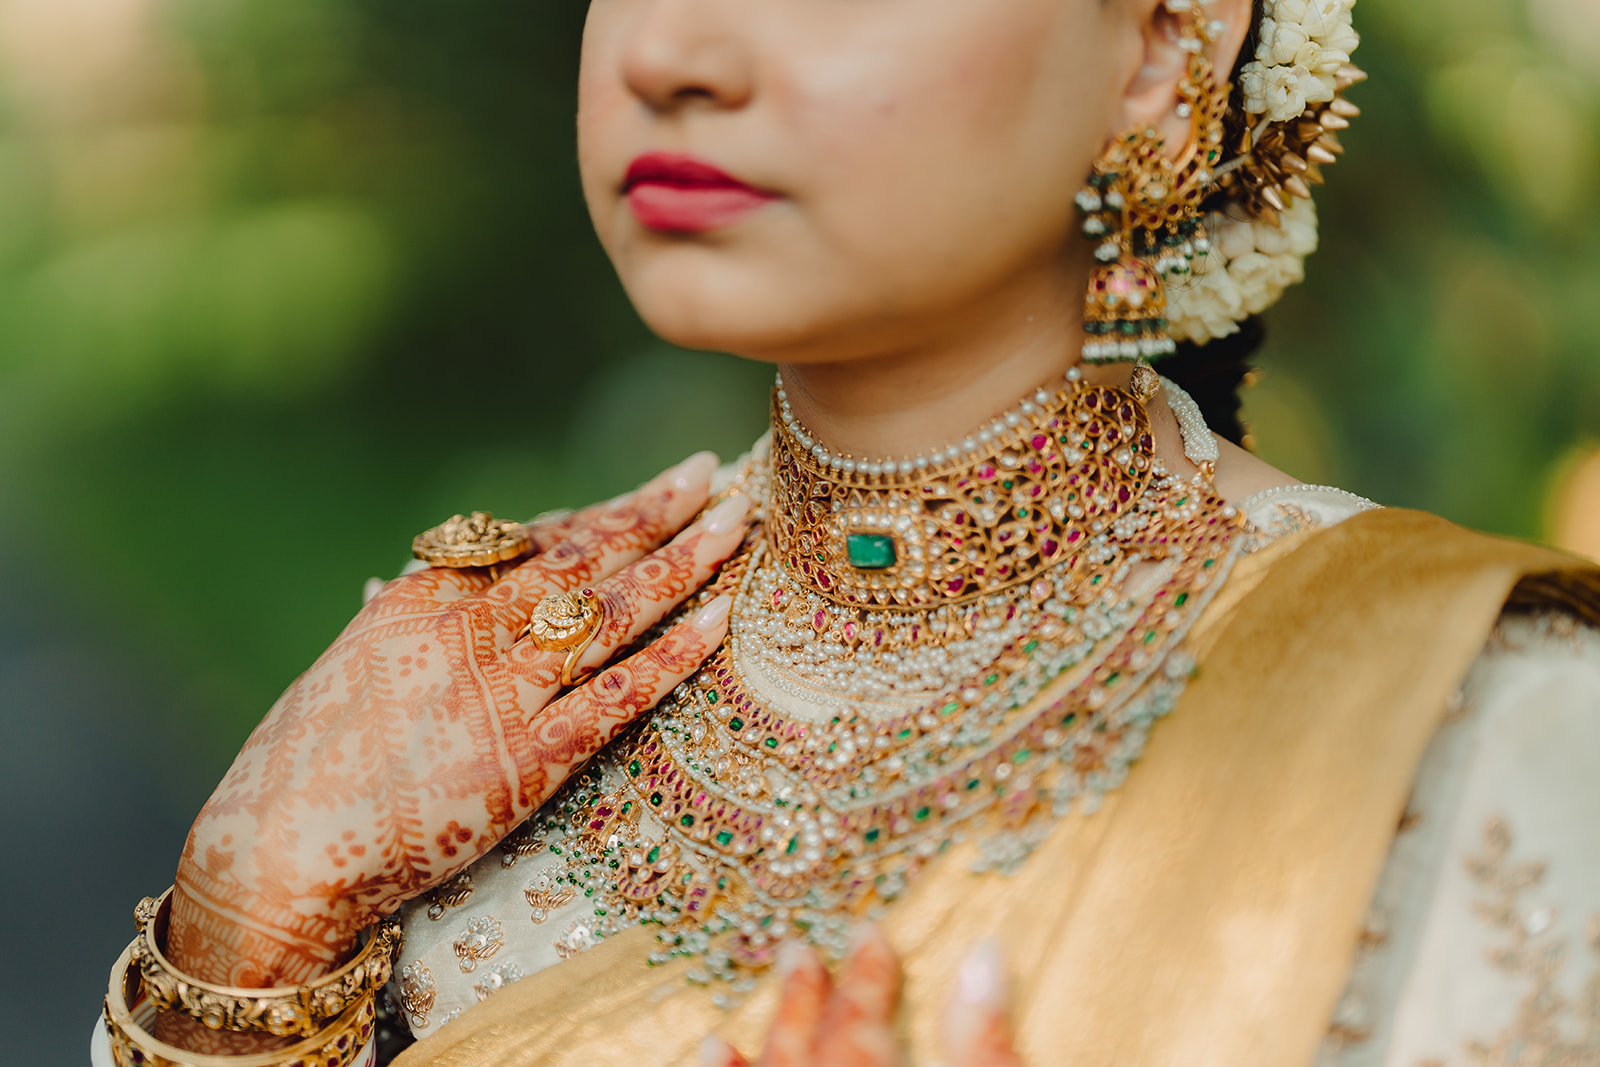 Jeweled elegance: Capturing the bride's beauty as she dazzles in exquisite jewelry